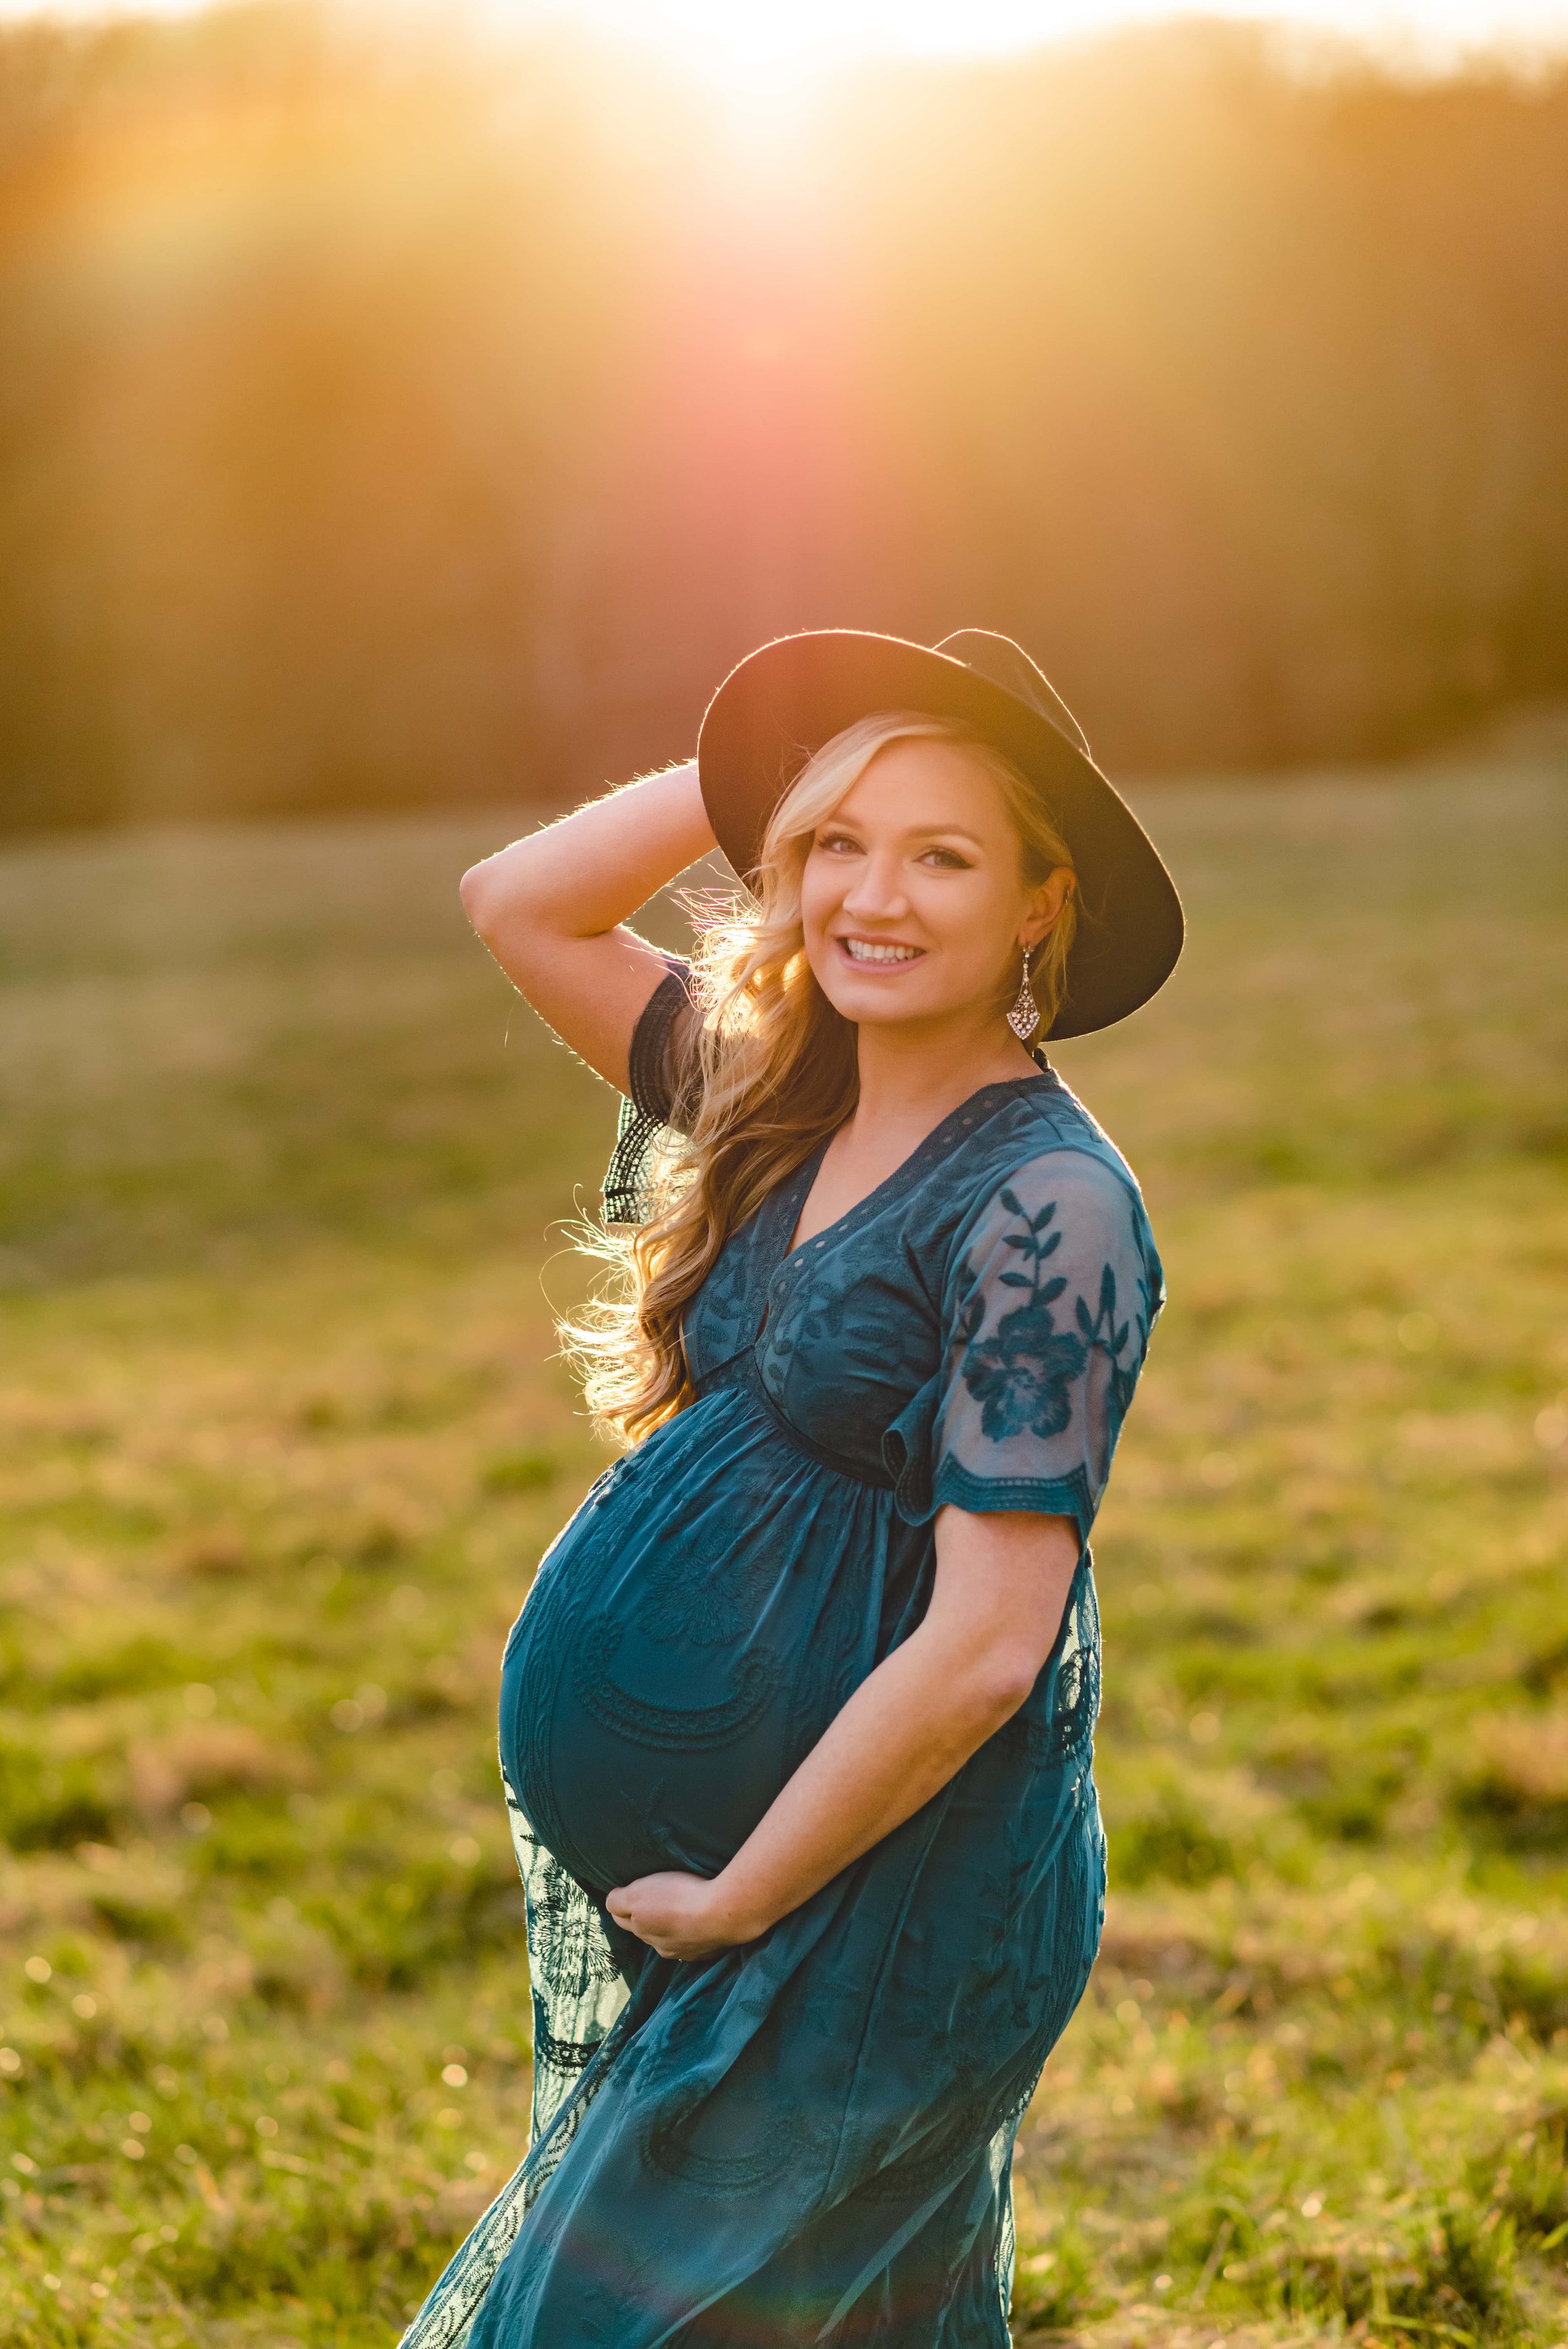 Maryland Maternity Photoshoot with expecting mom and glowing sun